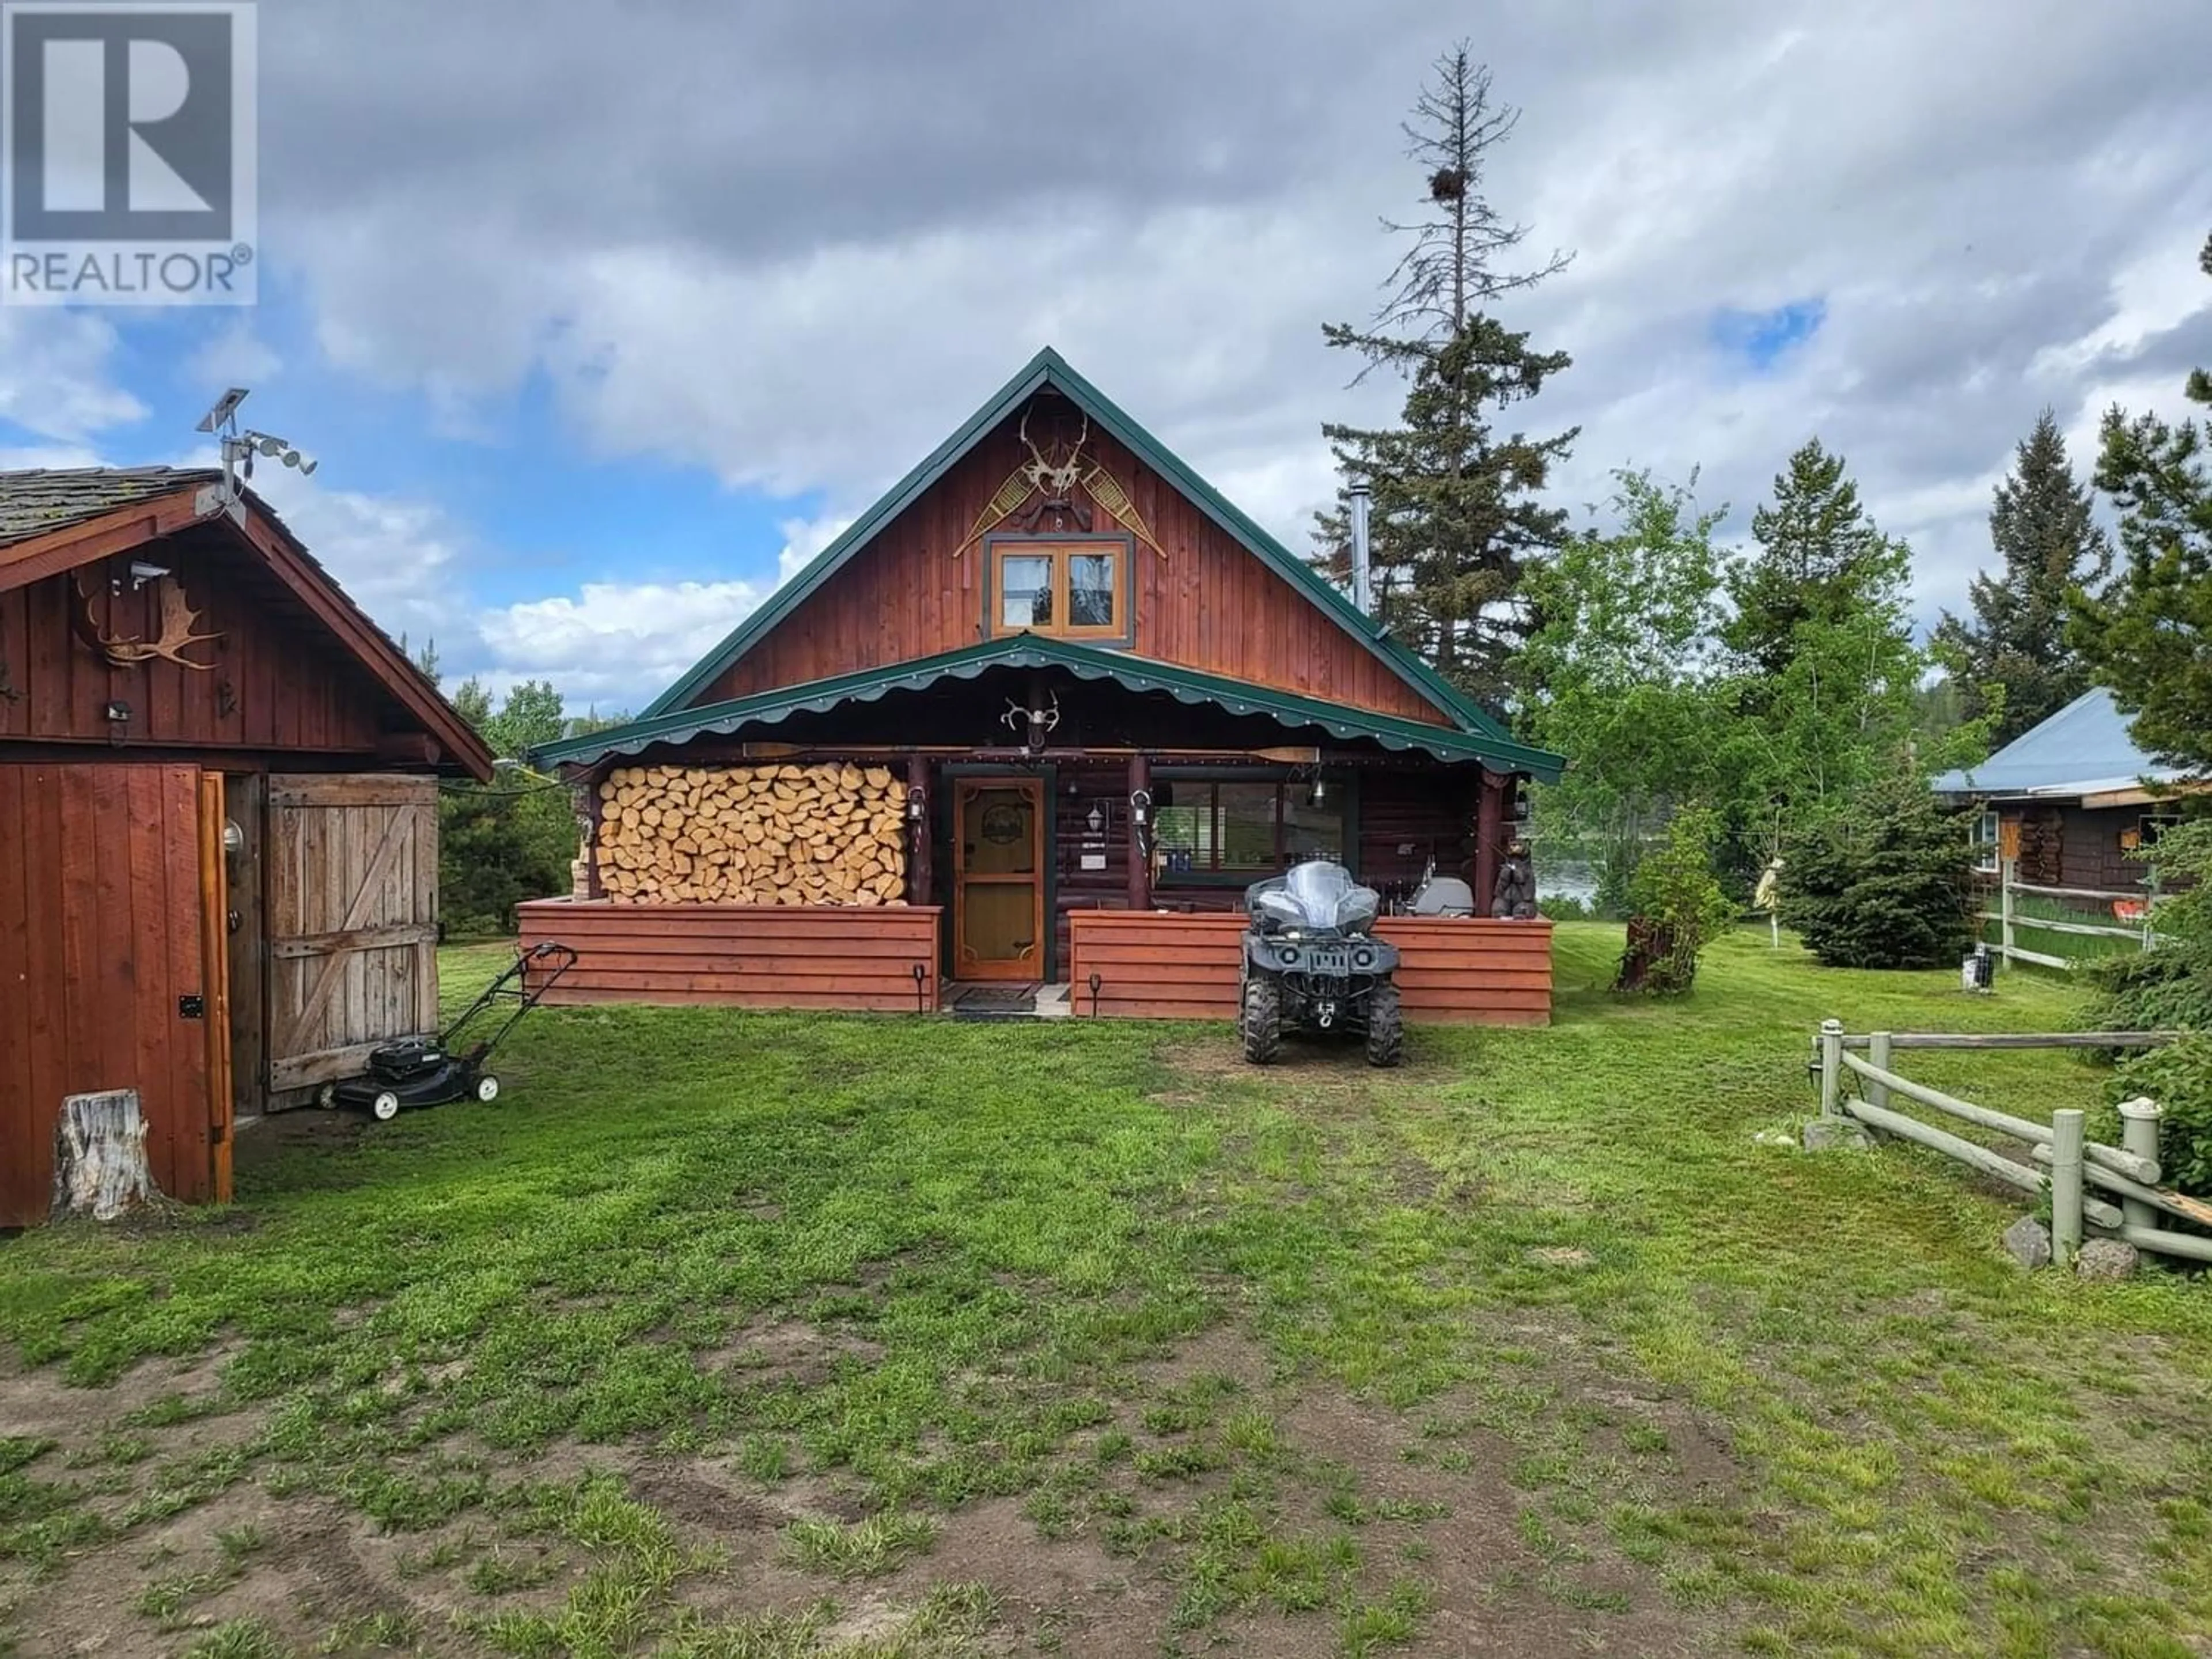 Cottage for 4881 MAINDLEY ROAD, Chilcotin British Columbia V0L1A0